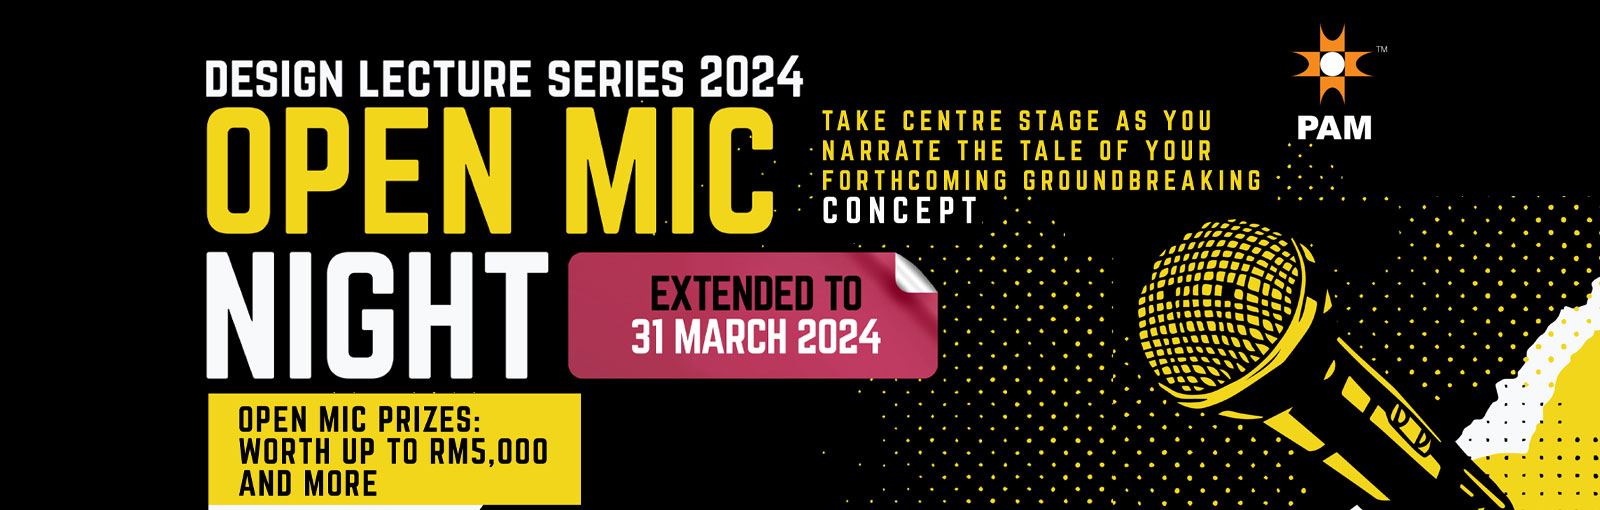 Design Lecture Series 2024: Open Mic Night